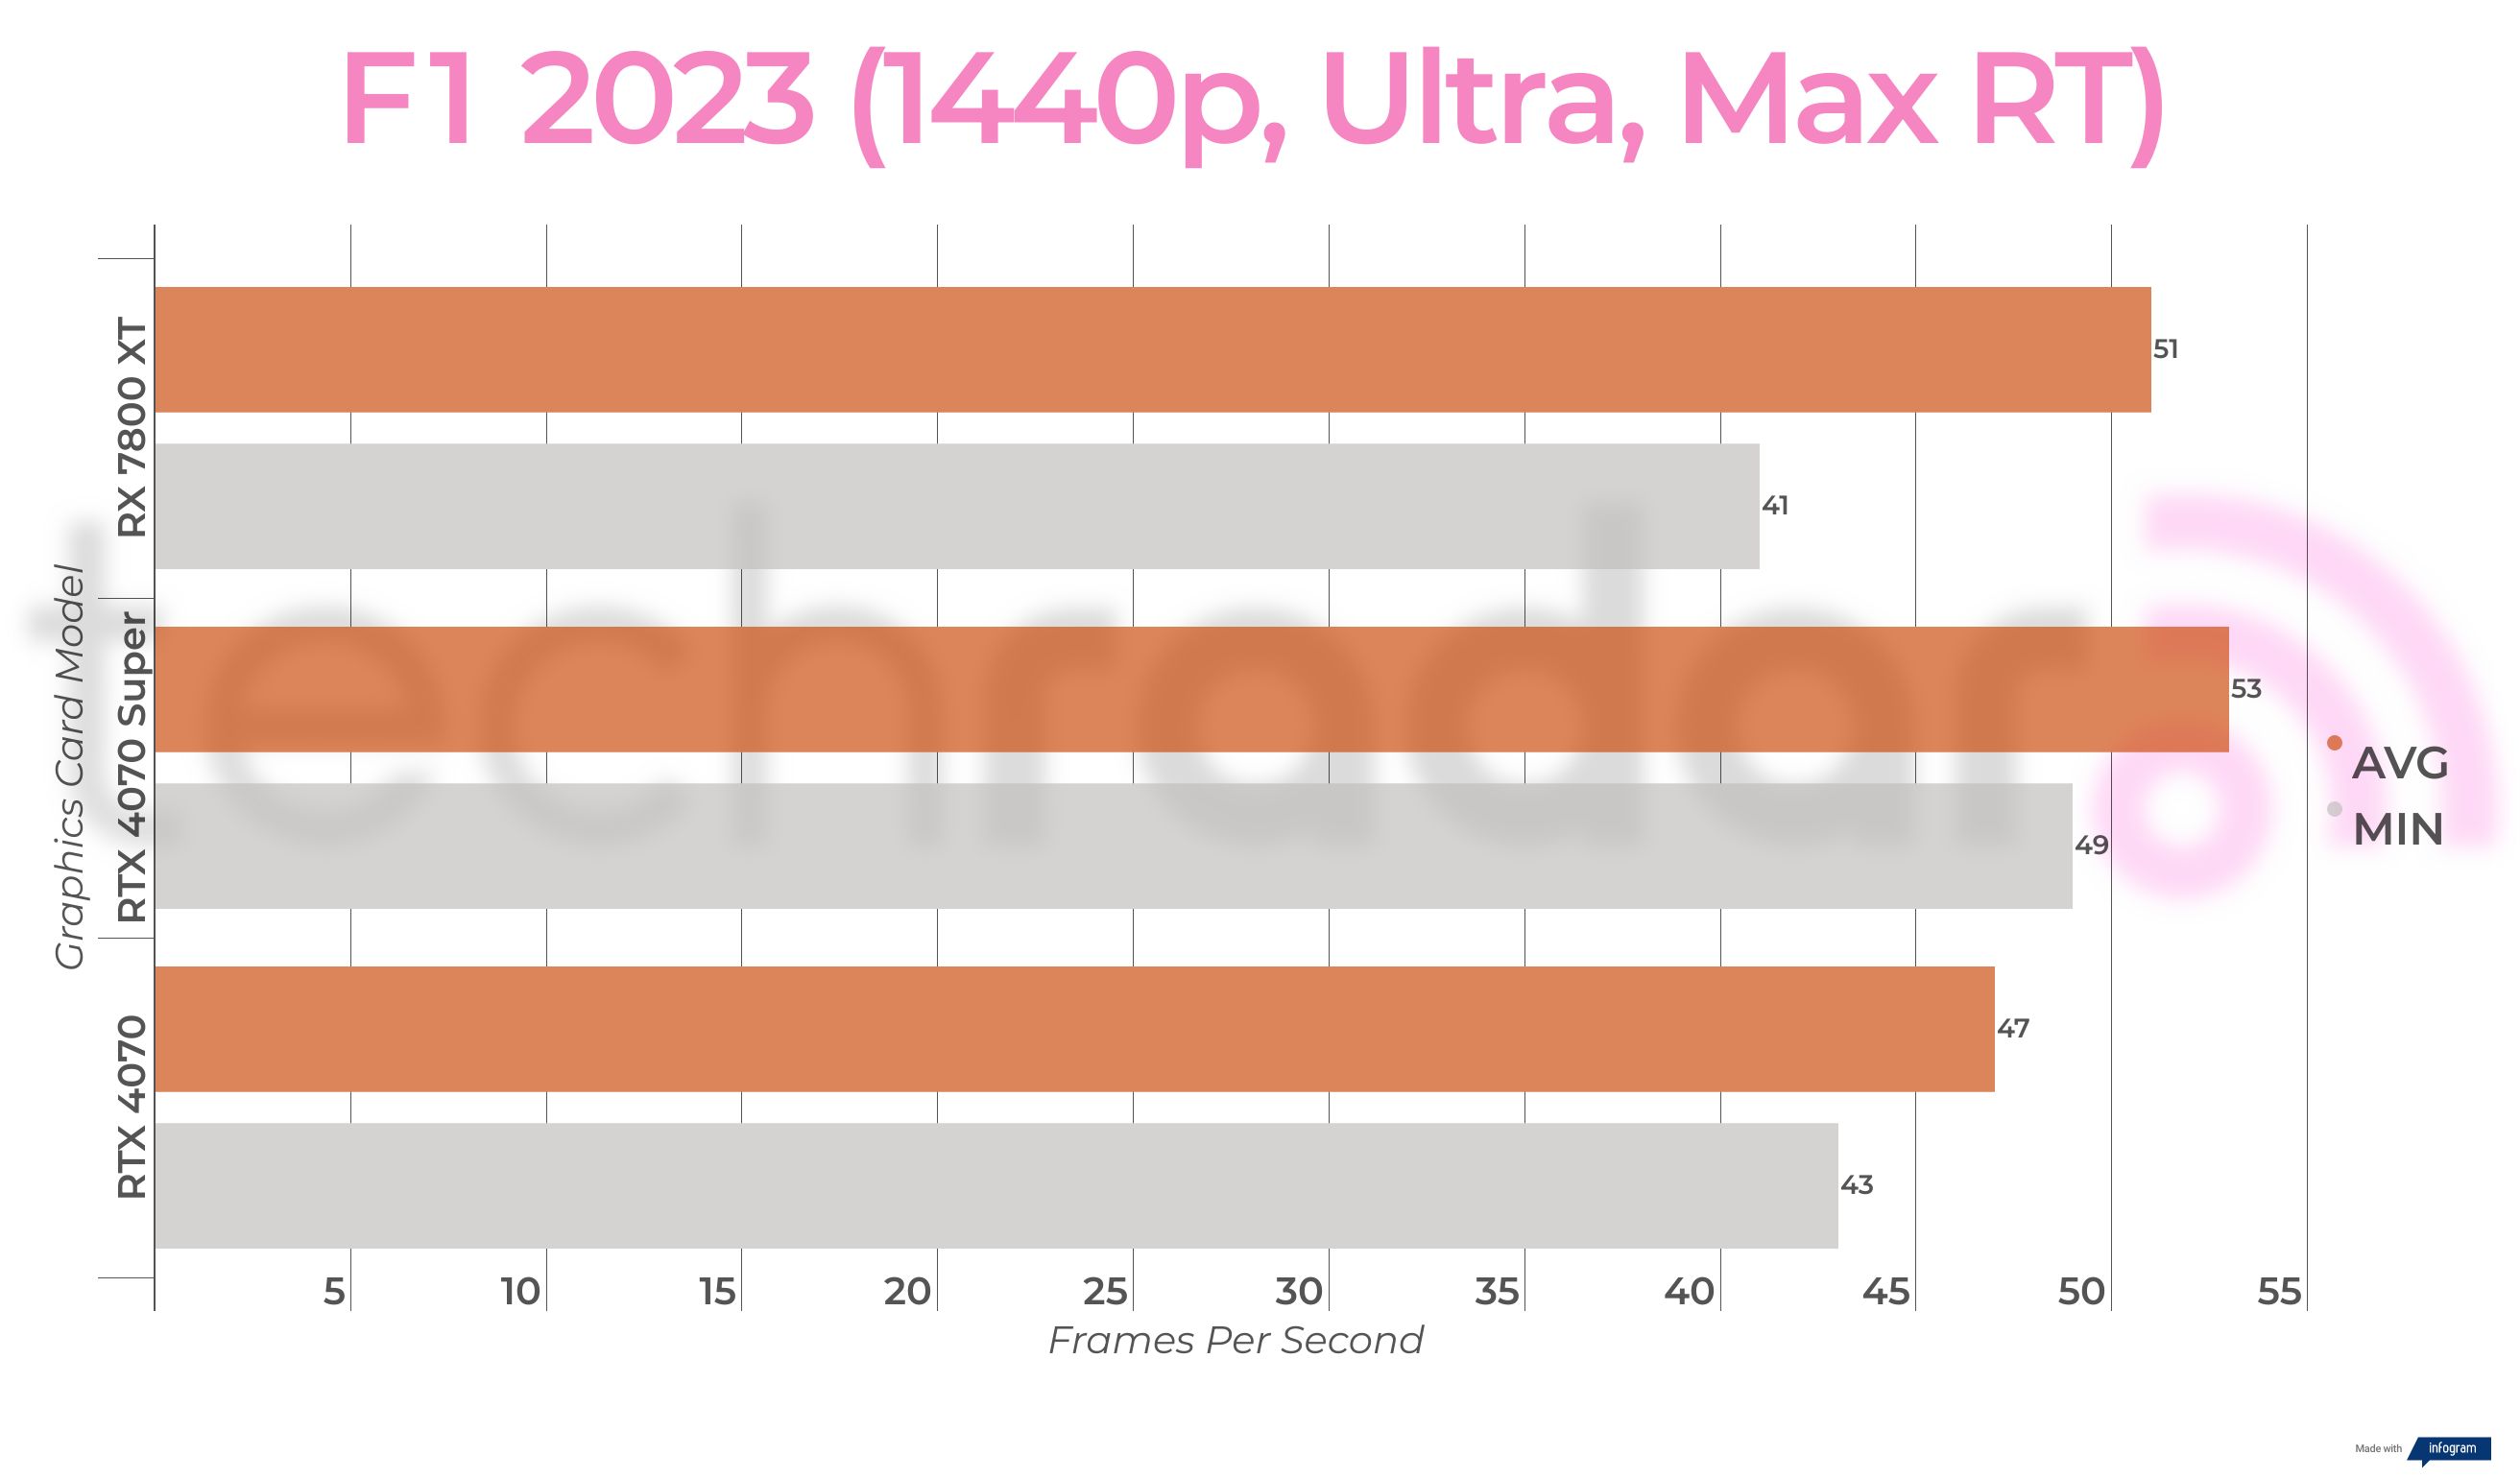 Benchmark results for the Nvidia RTX 4070 Super